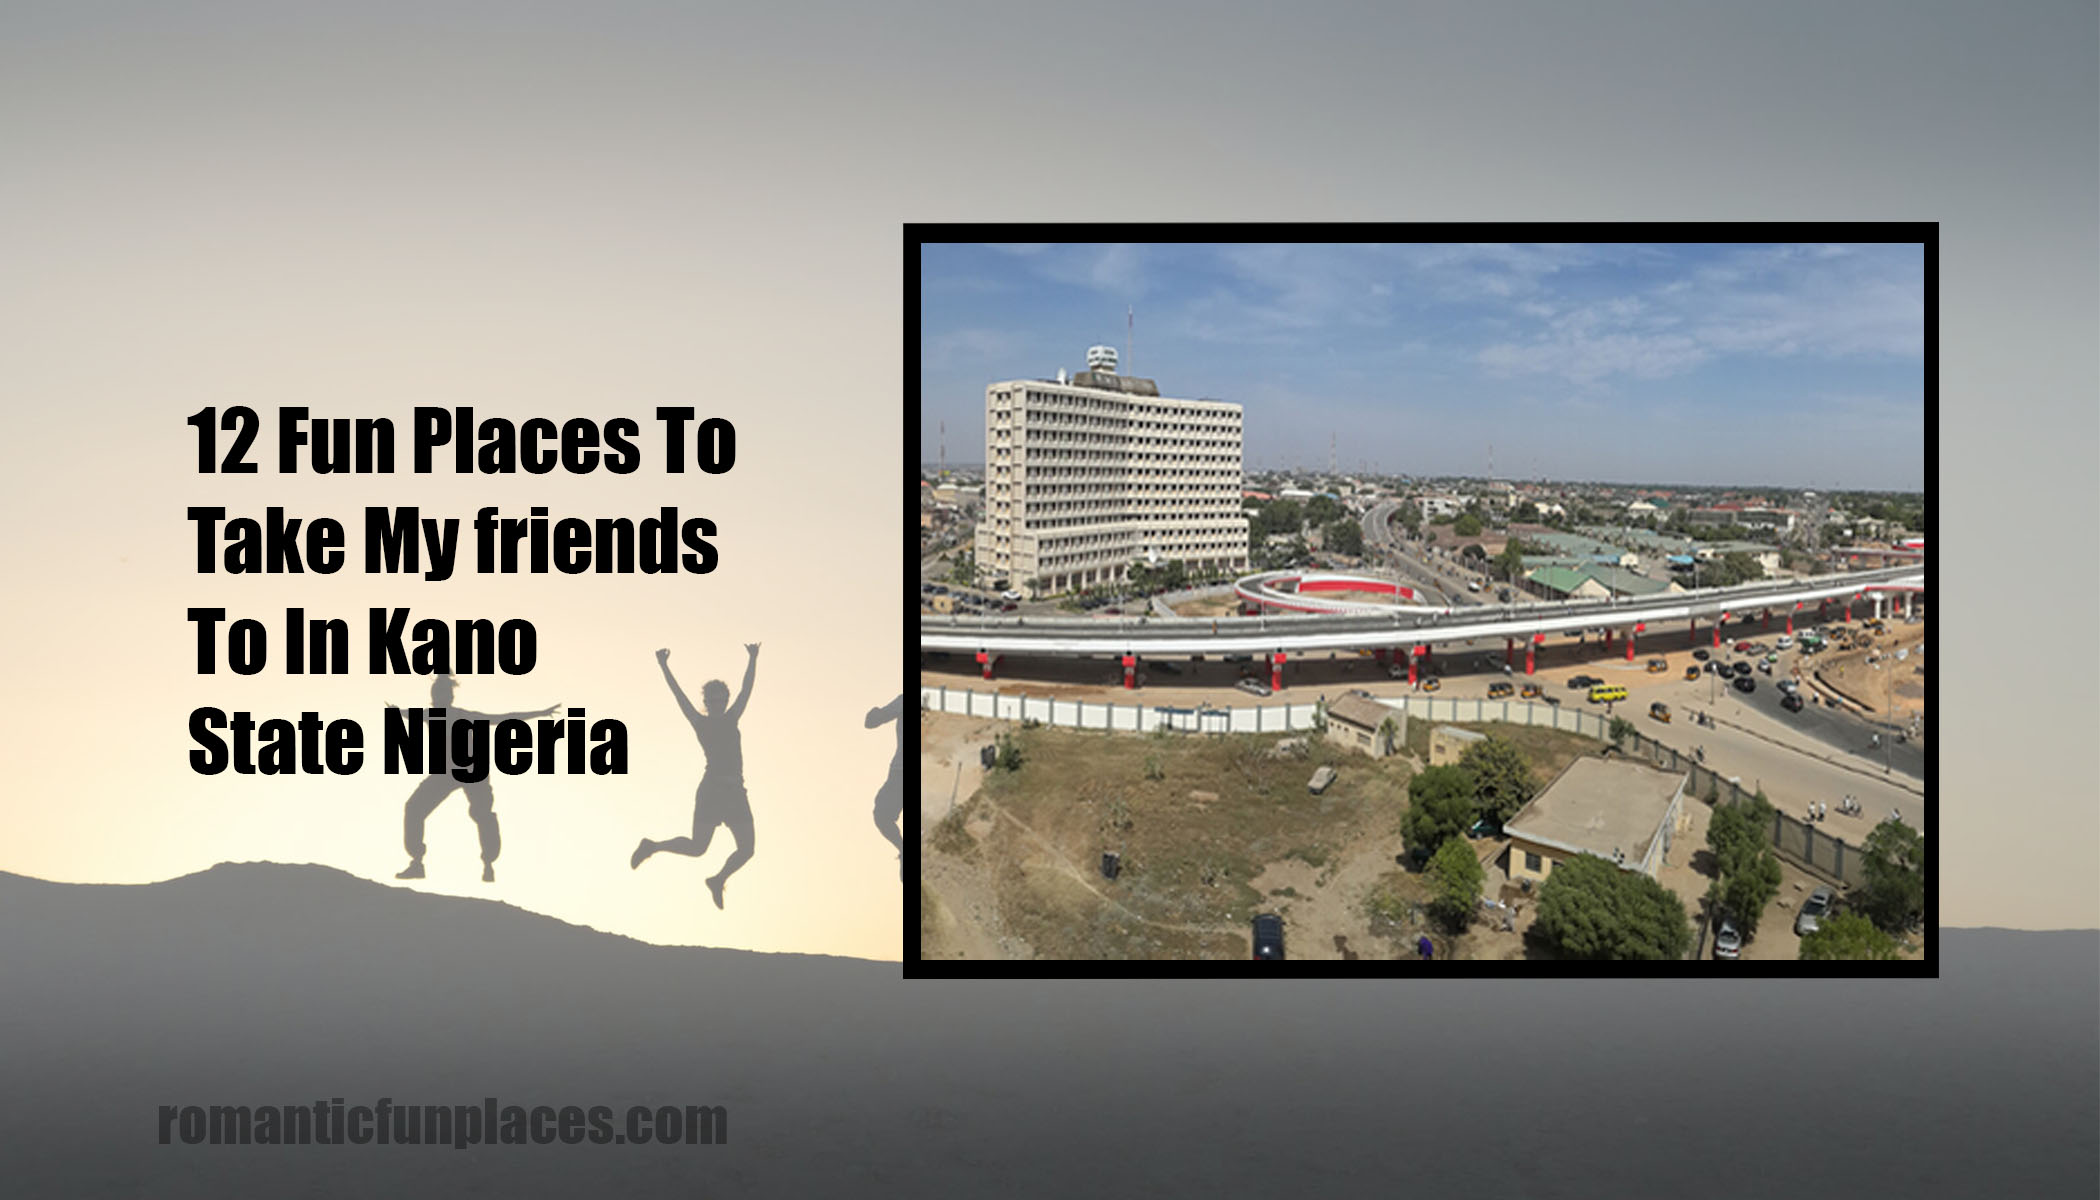 12 Fun Places To Take My friends To In Kano State Nigeria